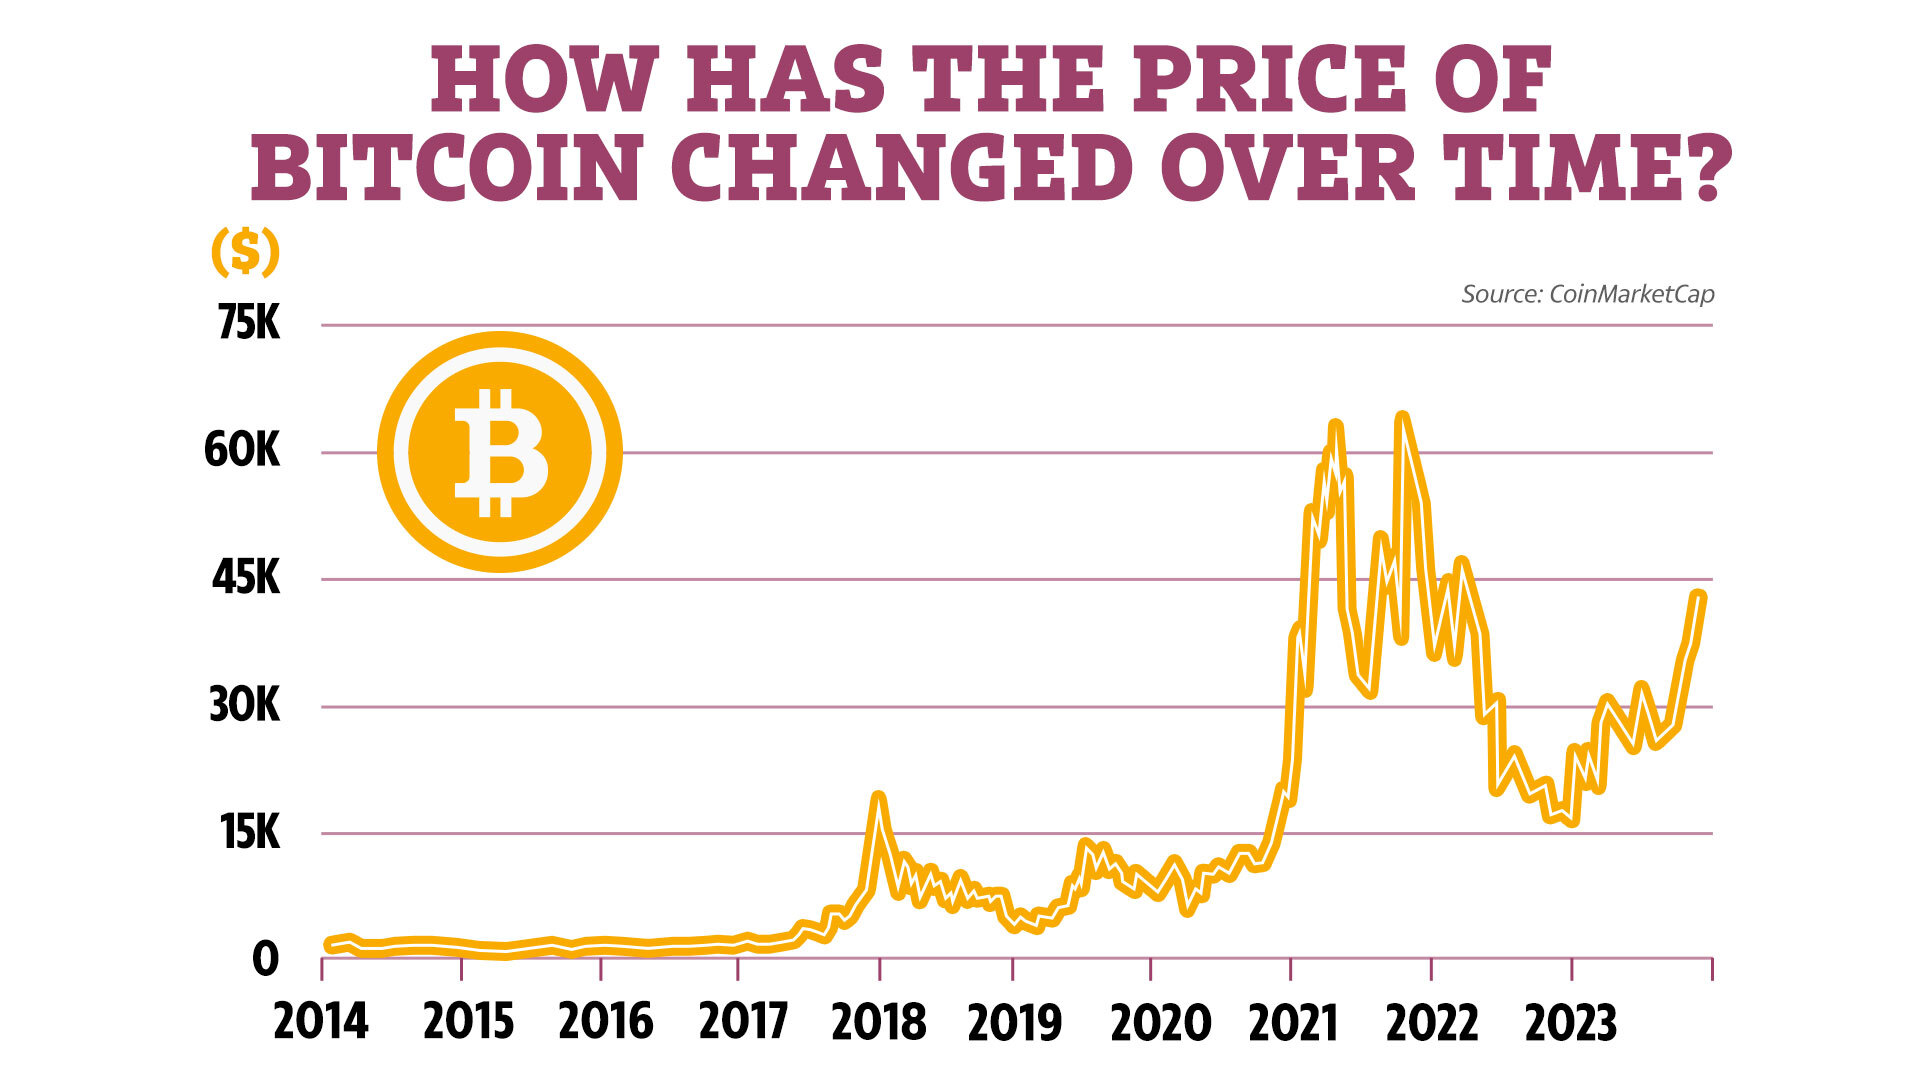 Bitcoin: what has caused the cryptocurrency’s latest revival? | Bitcoin | The Guardian